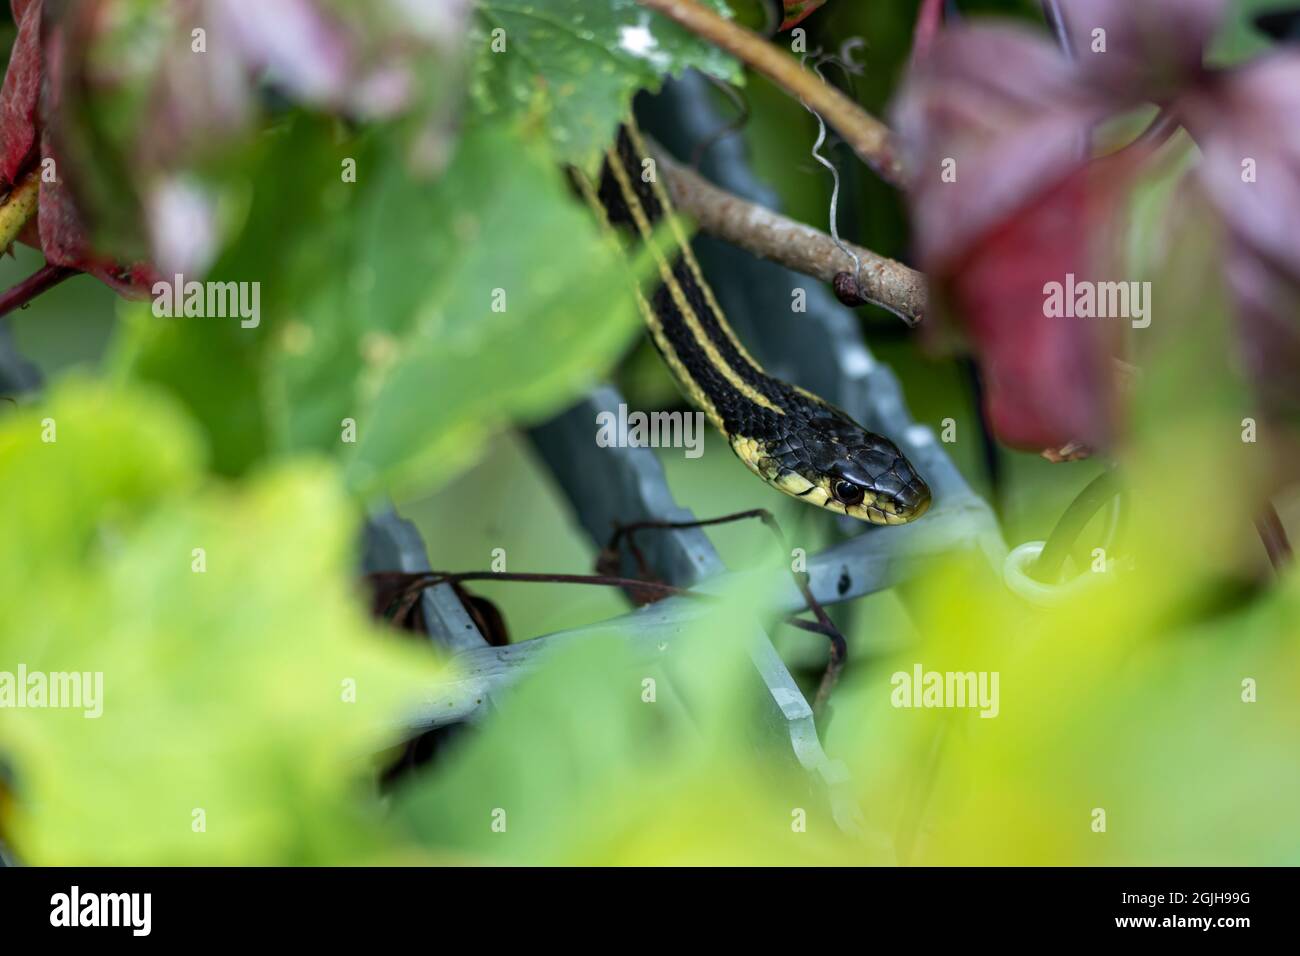 The head of a garter snake (Thamnophis sirtalis) is seen as it slithers along a metal grate and among the leaves and flowers of surrounding plant life Stock Photo